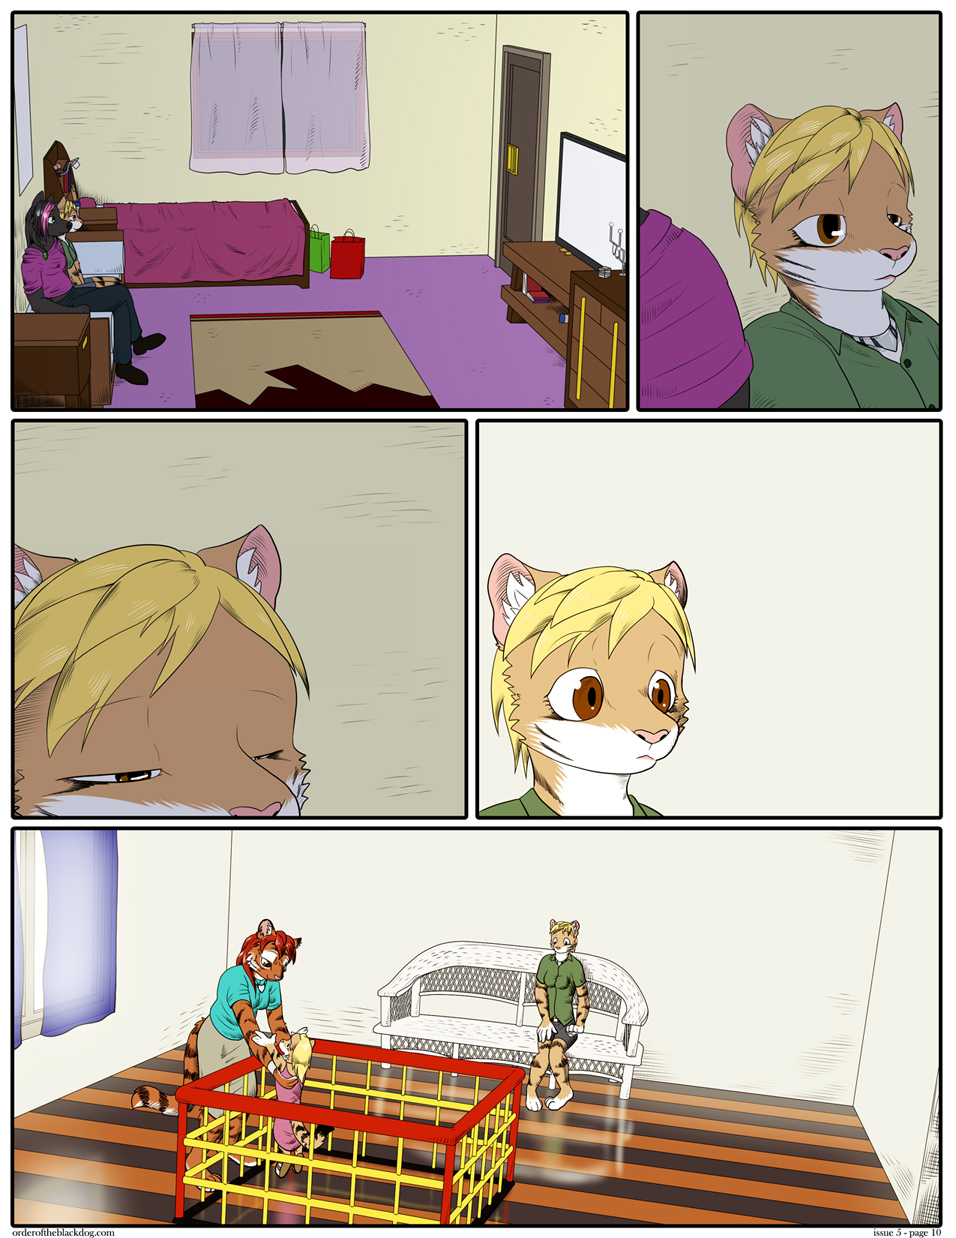 Issue 5, Page 10